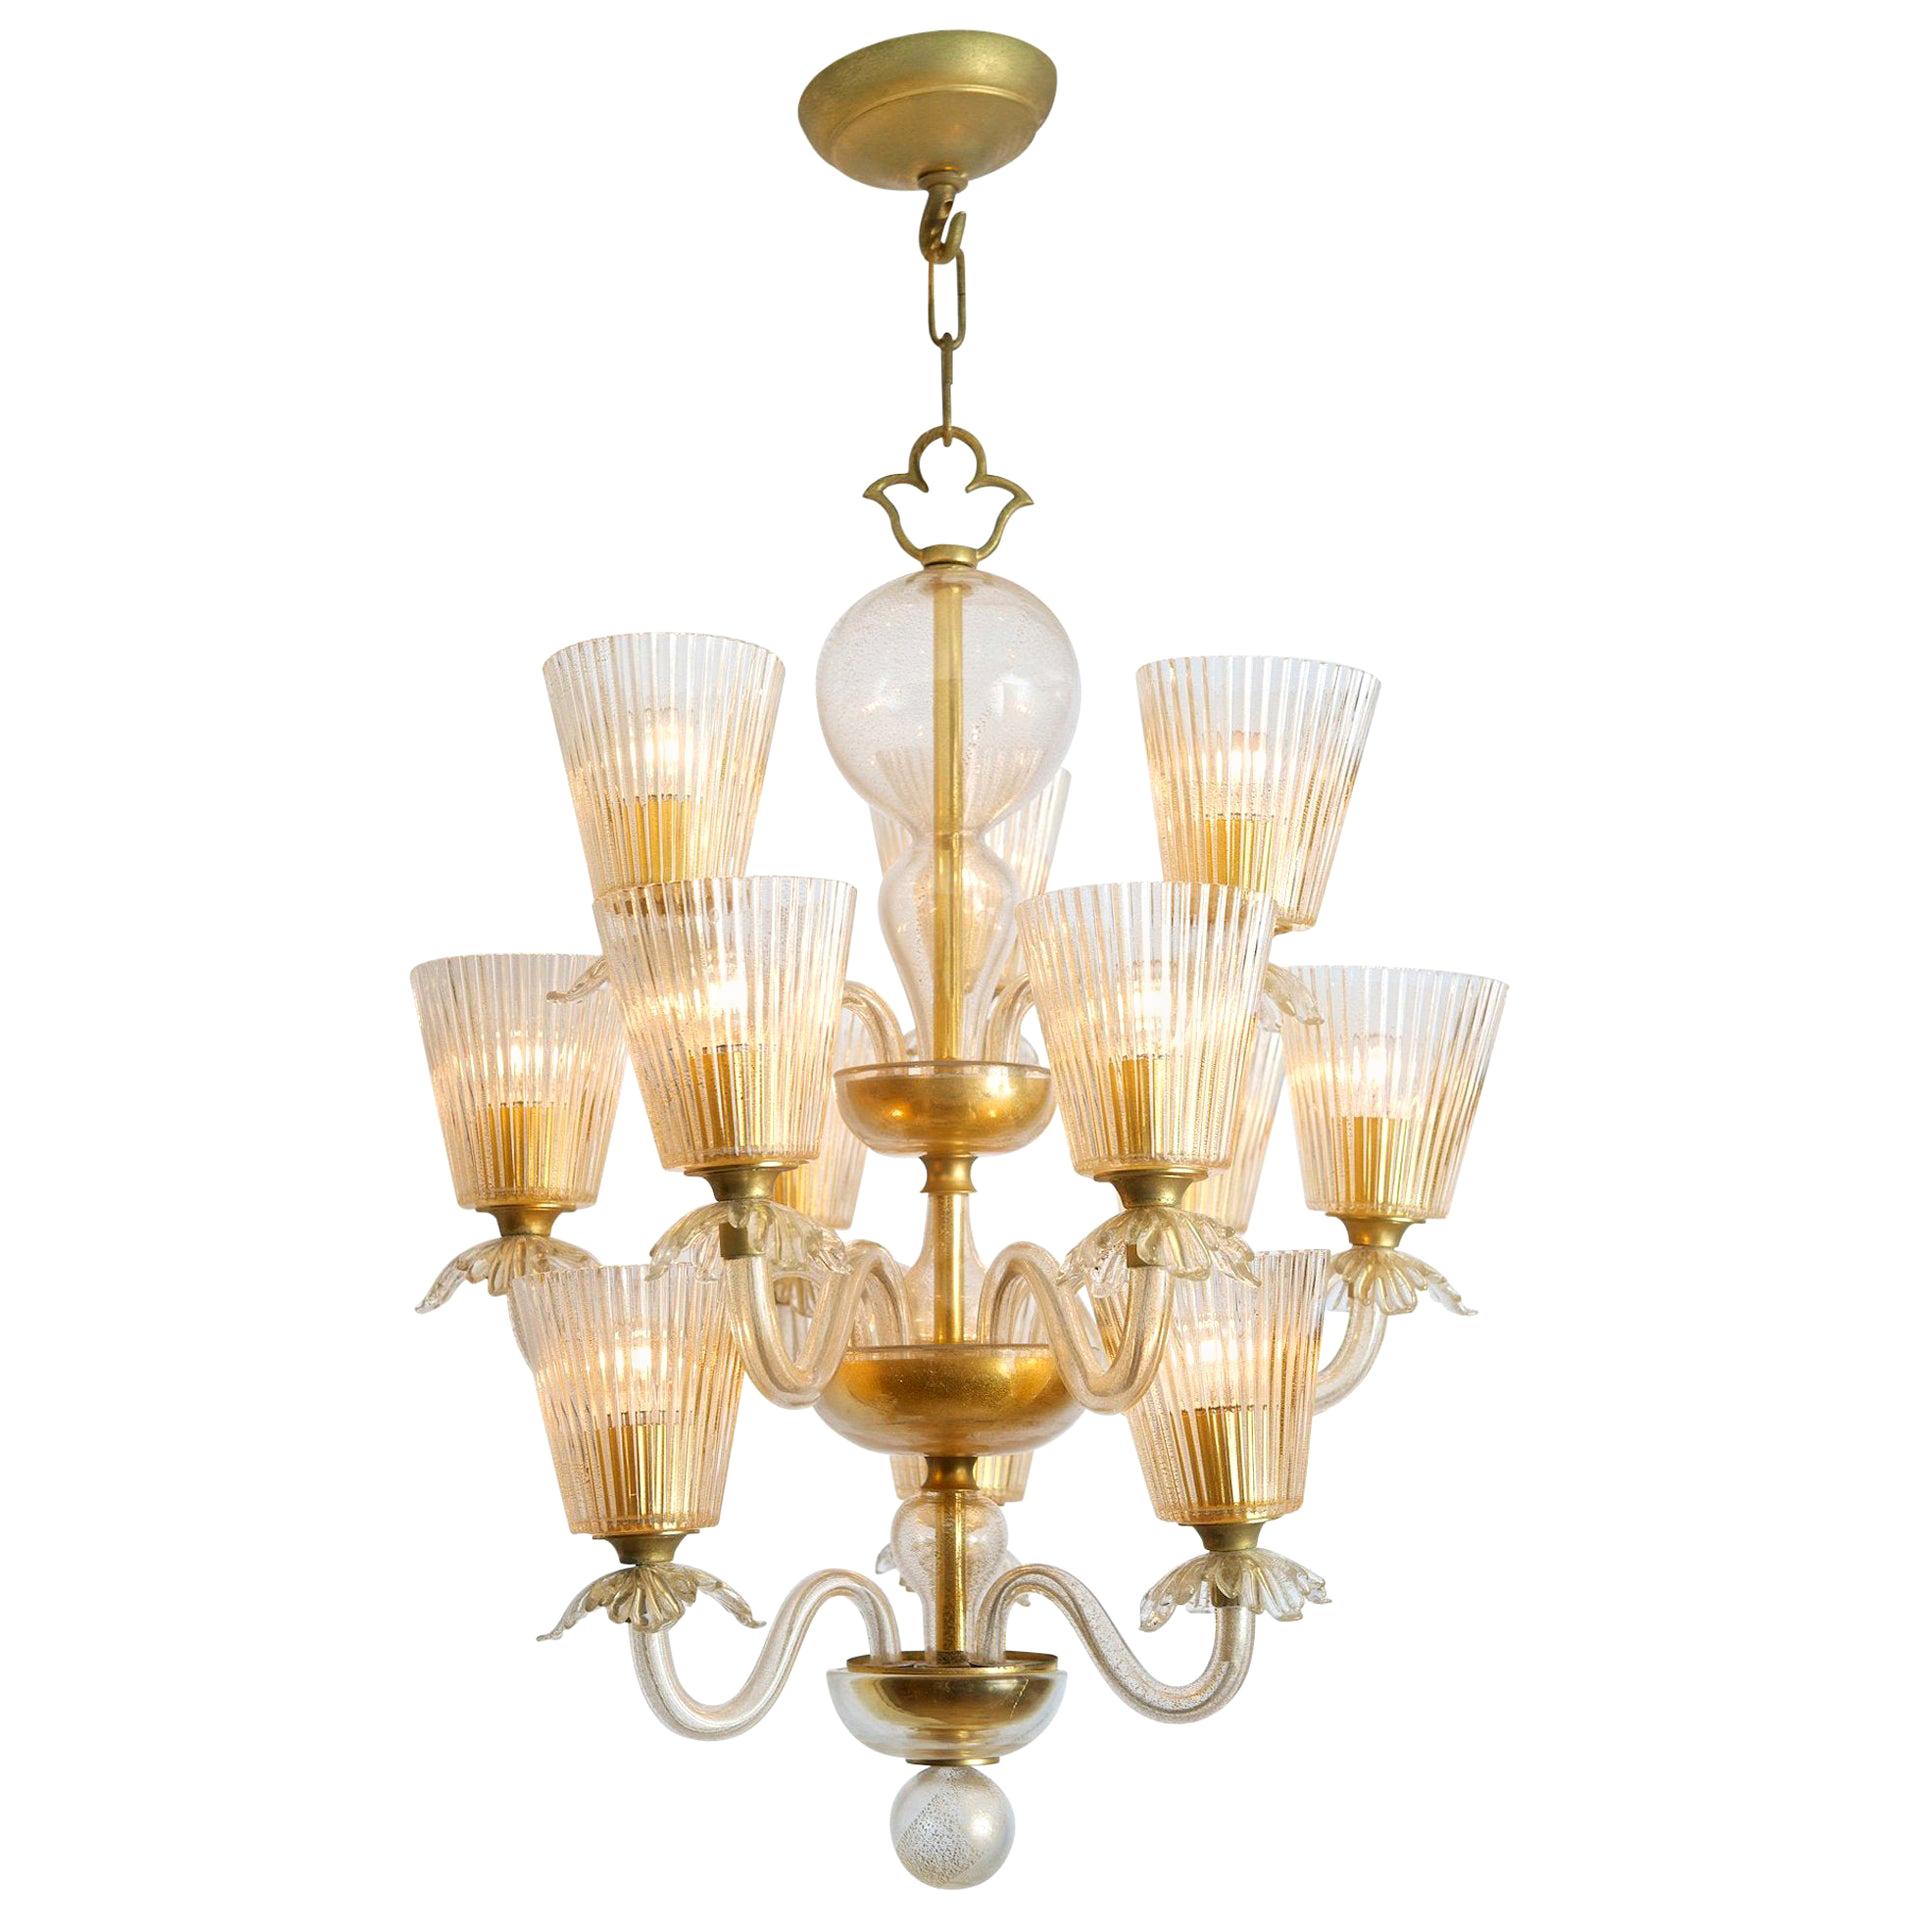 Barovier & Toso 12-Arm Chandelier with Gold Inclusions